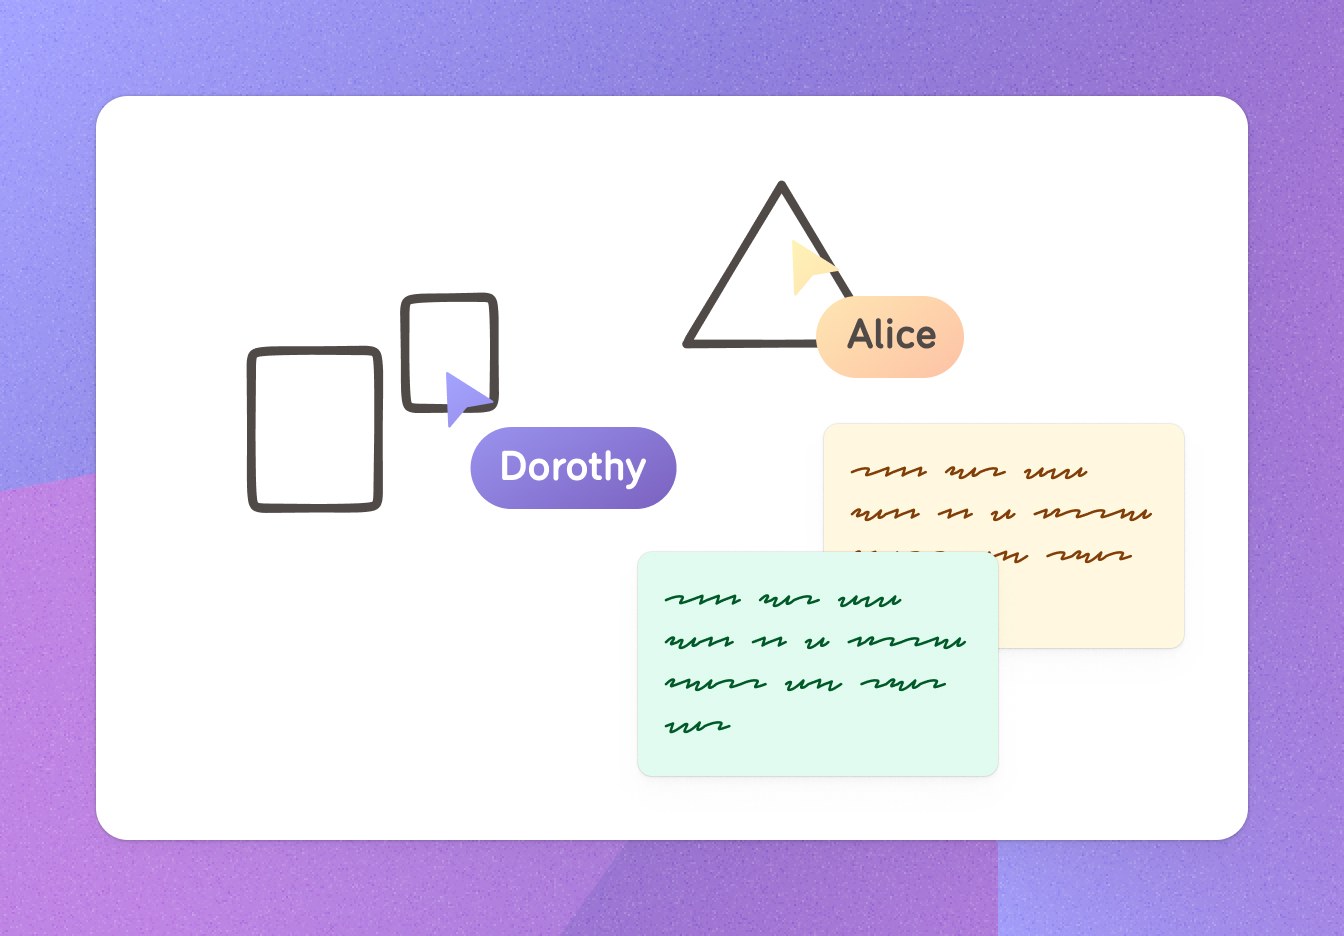 A whiteboard with some shapes and some sticky notes, and 2 mouse cursors: one marked 'Dorothy' and one marked 'Alice'.